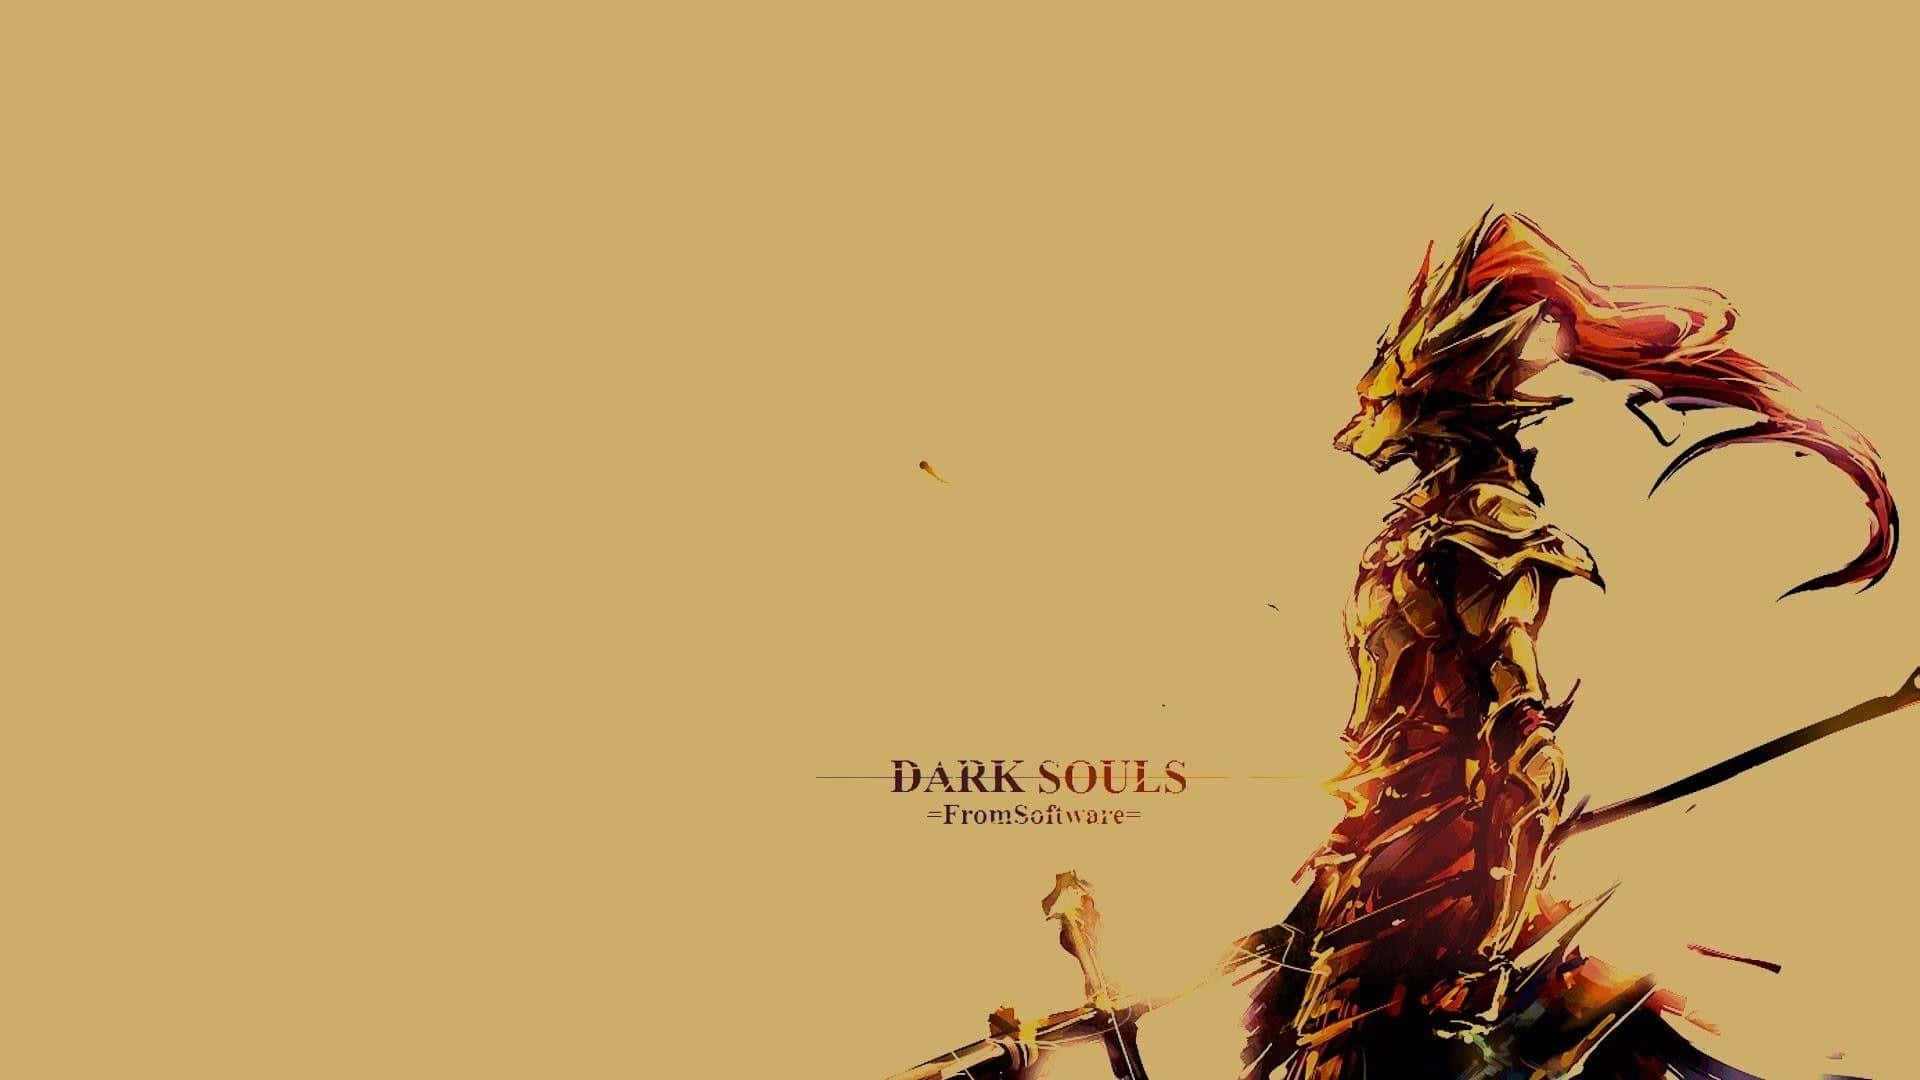 Dragon Slayer Ornstein - The Powerful Protector Wallpaper